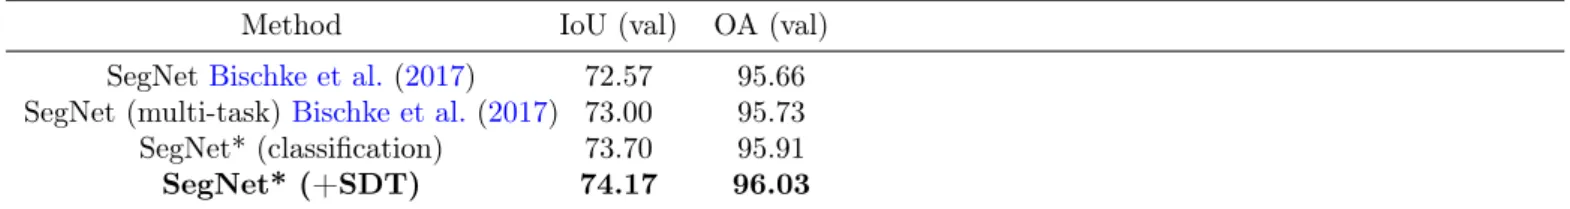 Table 3: Results on the validation set of the INRIA Aerial Image Labeling Benchmark for comparison to Bischke et al